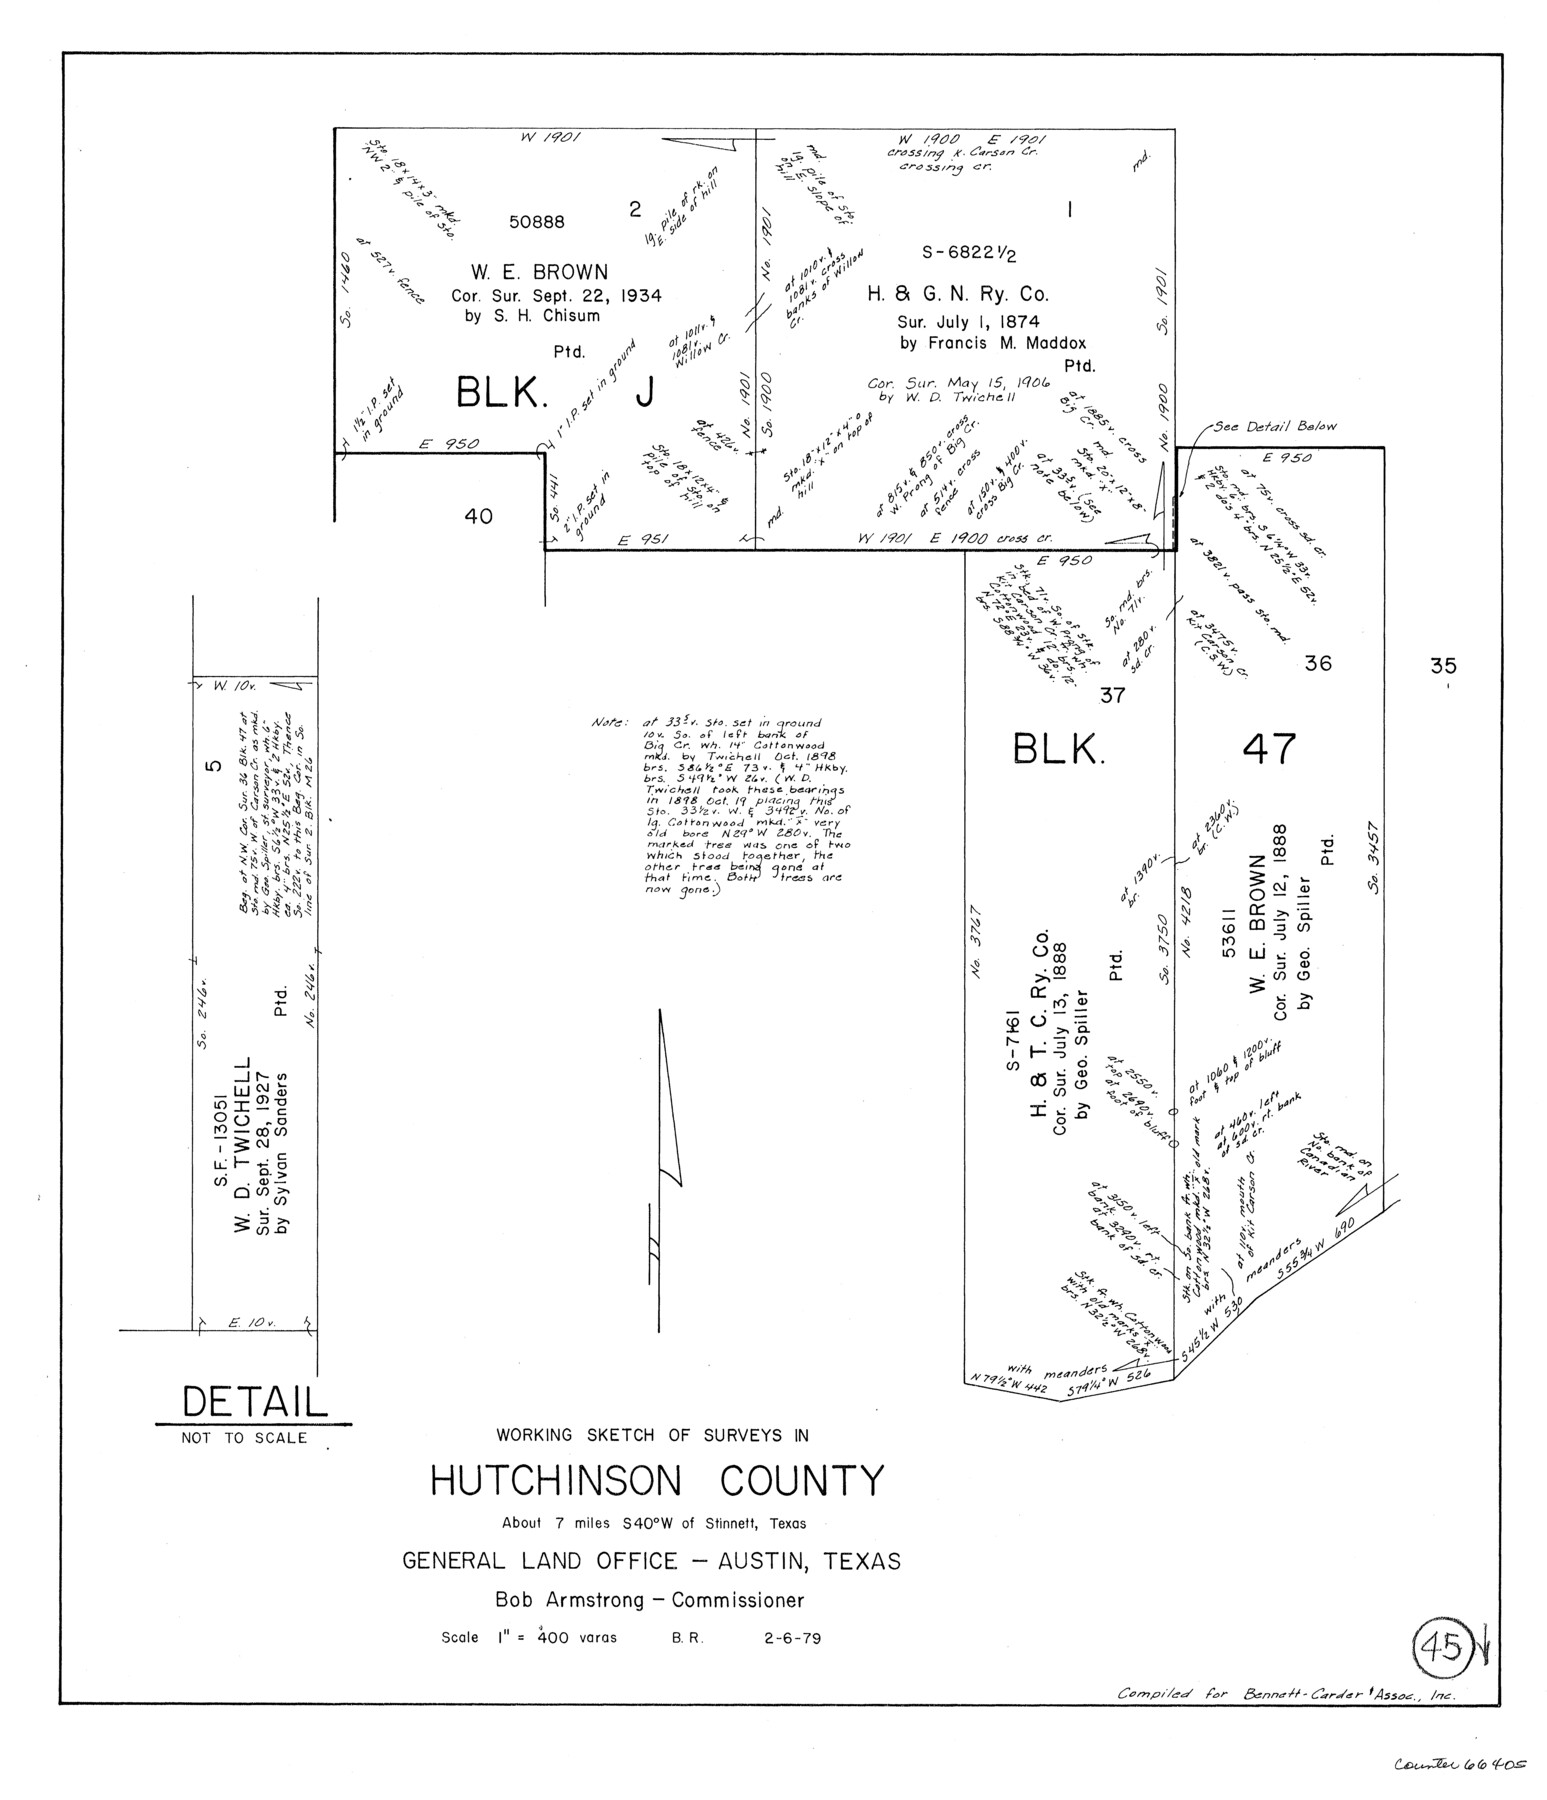 66405, Hutchinson County Working Sketch 45, General Map Collection